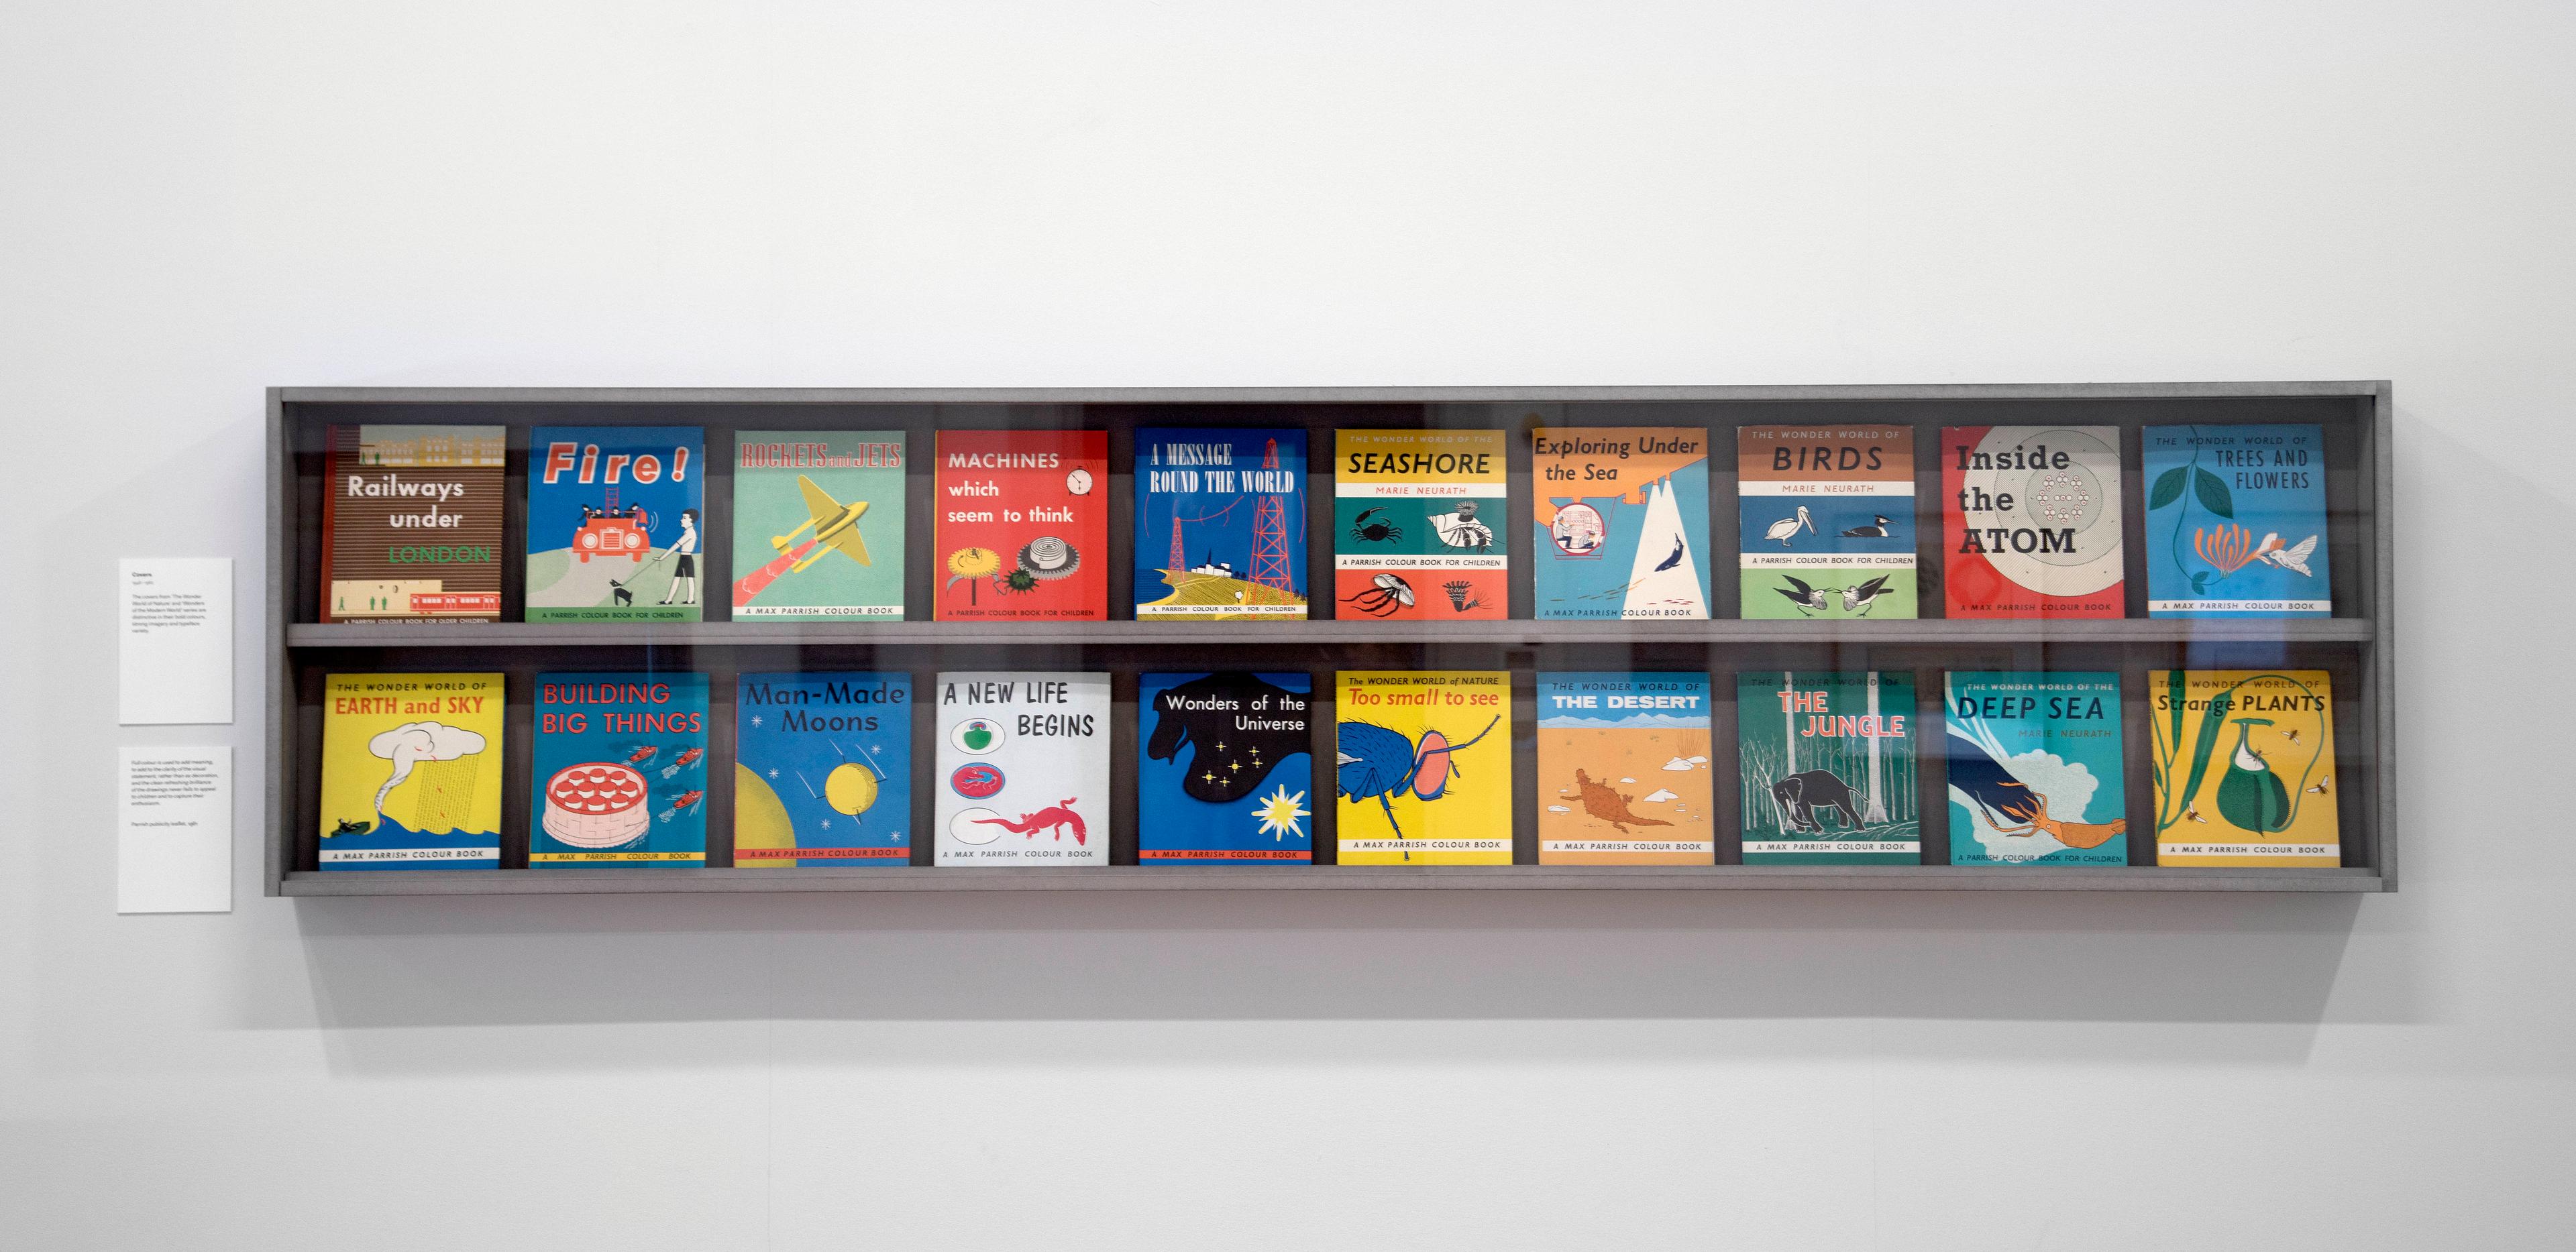 Display of book covers from the exhibition